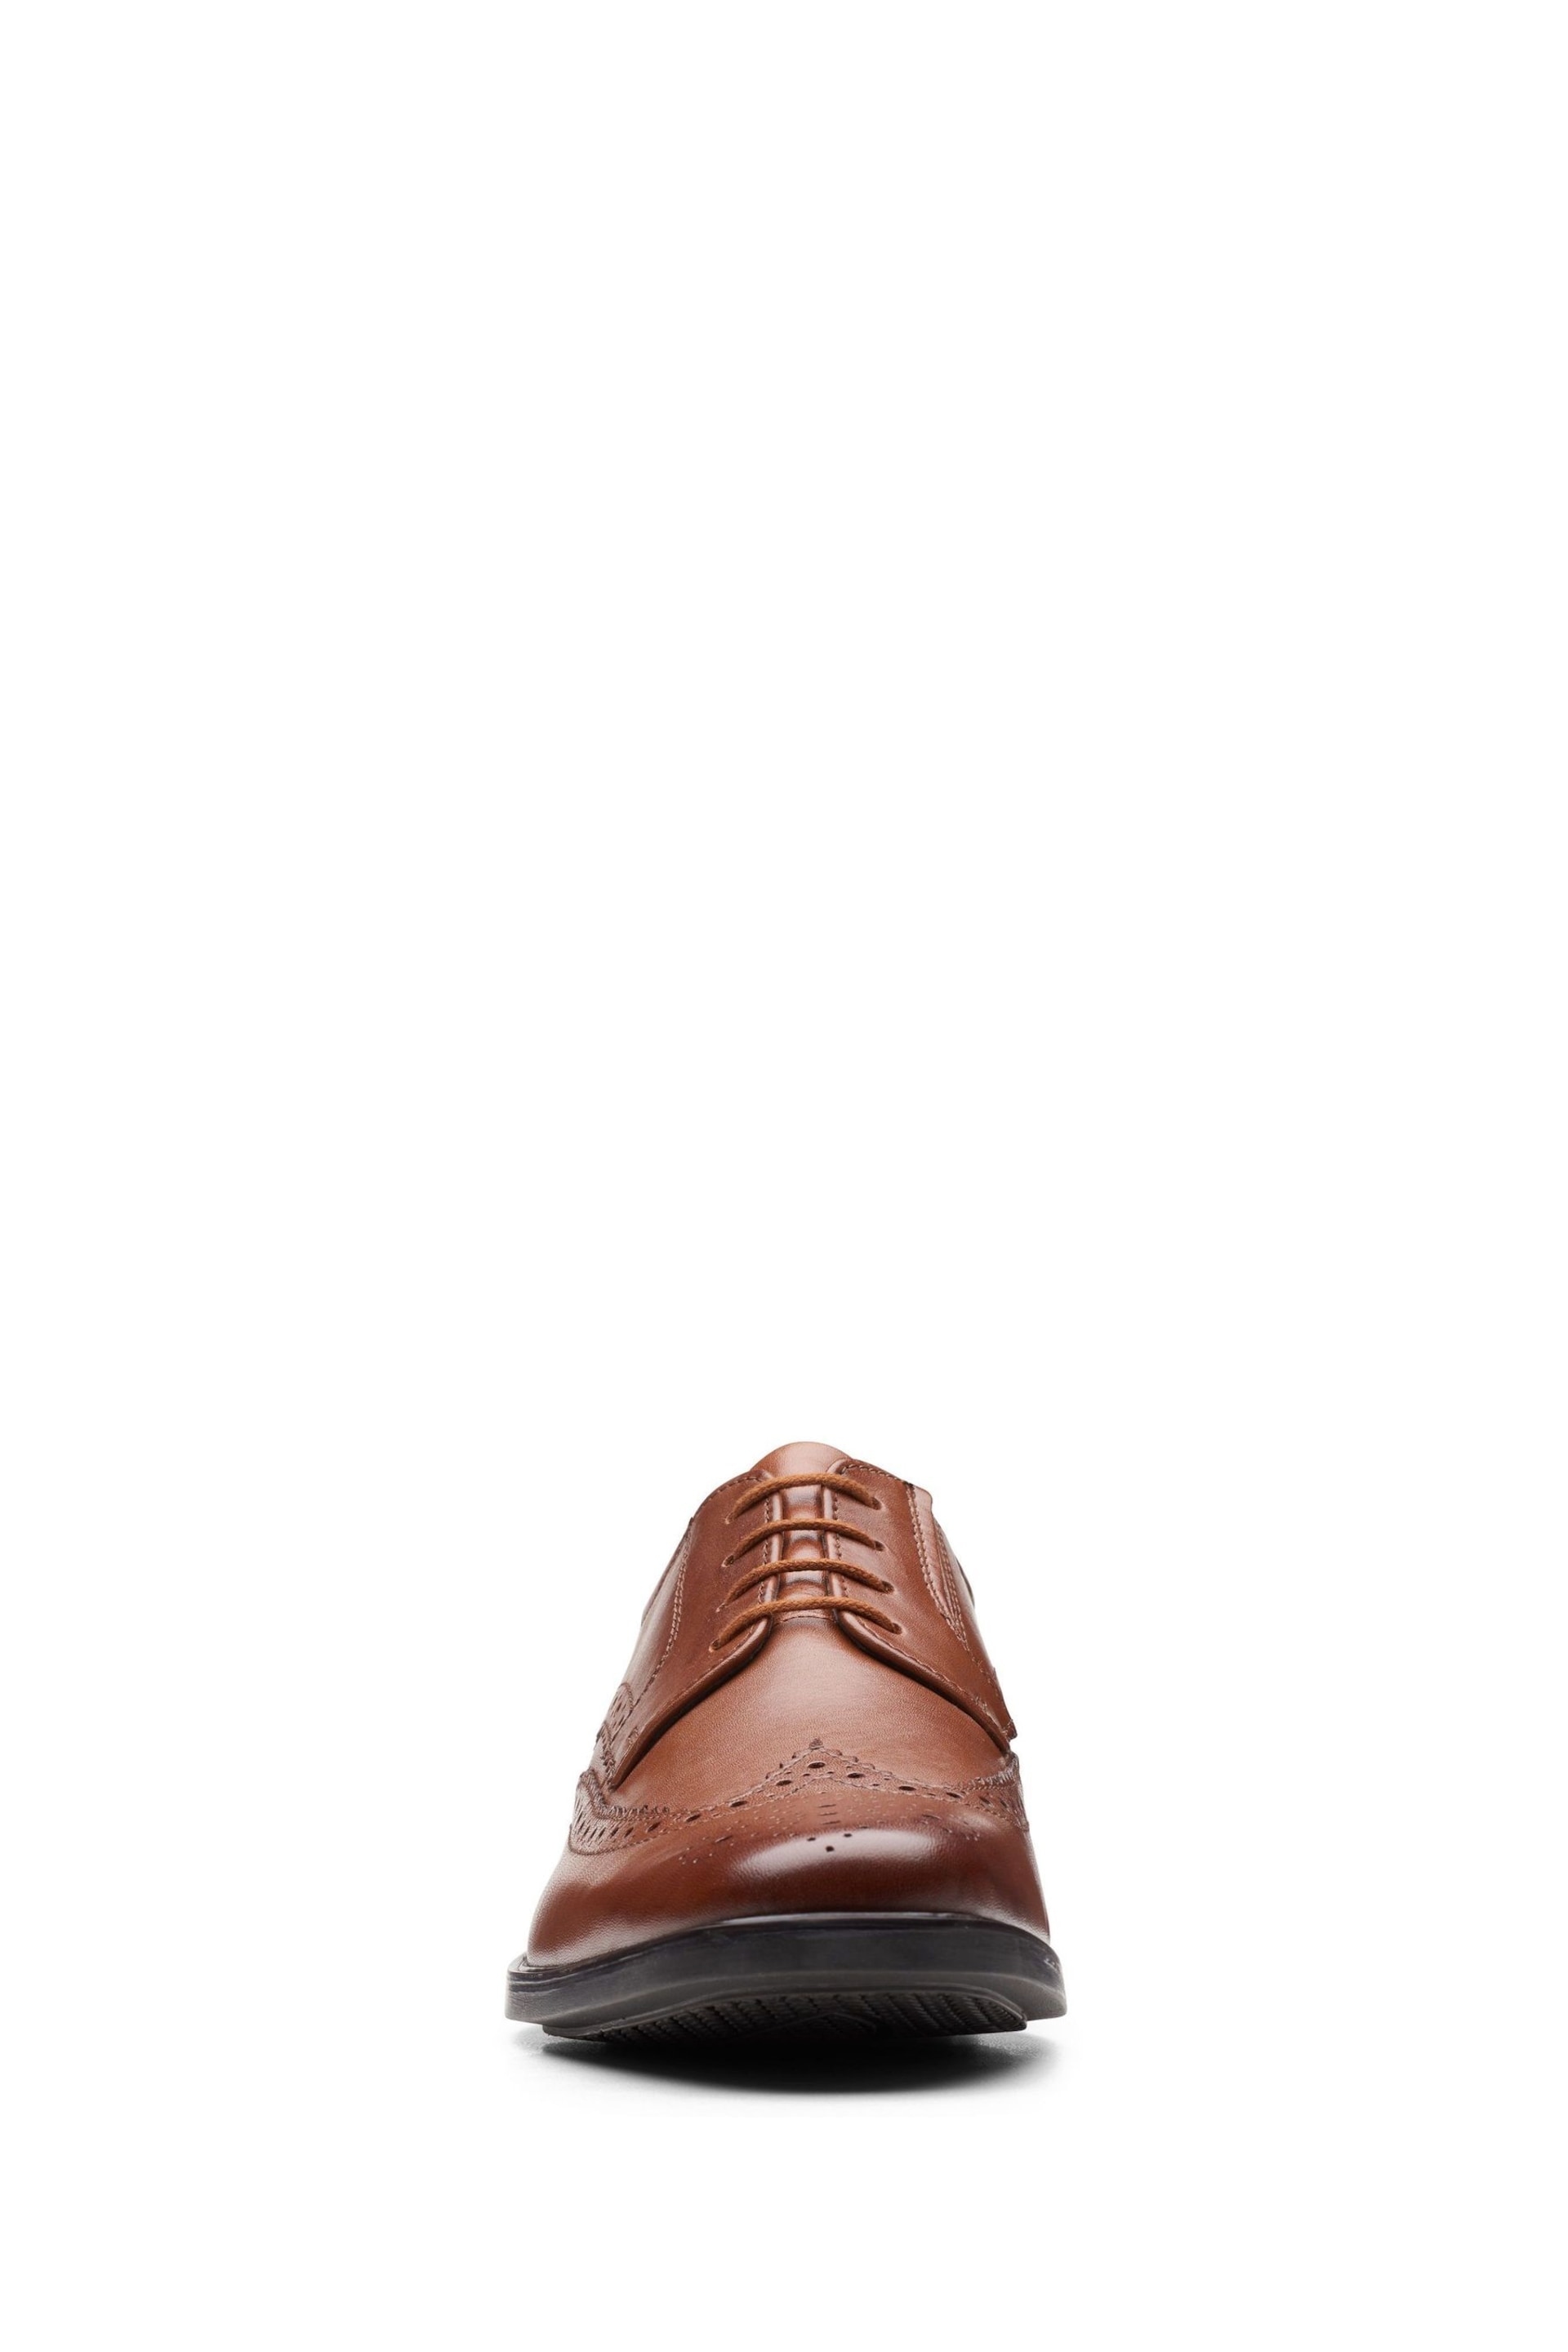 Clarks Natural Clarks Lea Howard Wing Shoes - Image 5 of 7